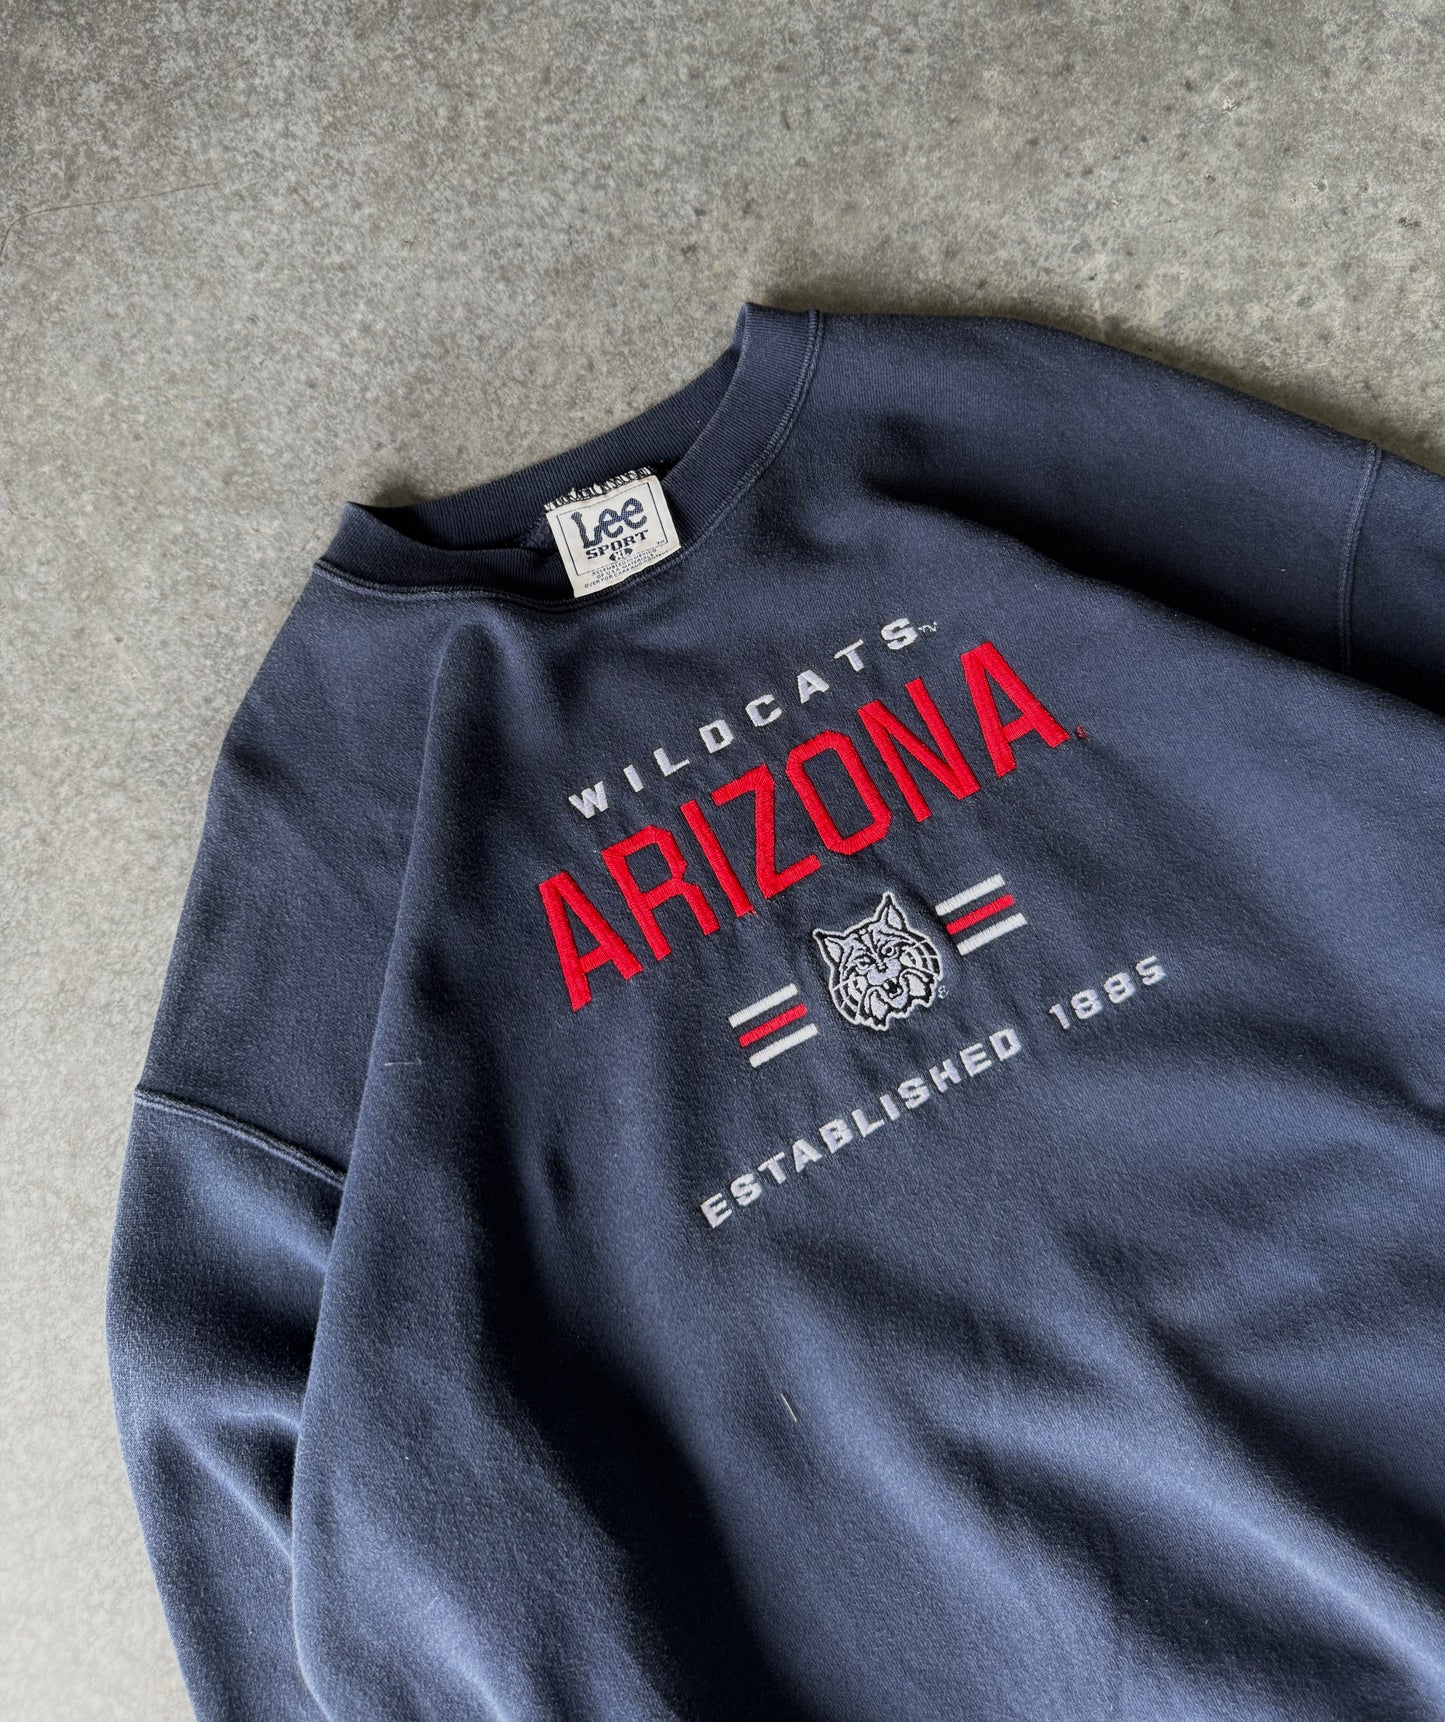 Vintage Arizona Wildcats Embroided Sweater (2XL)